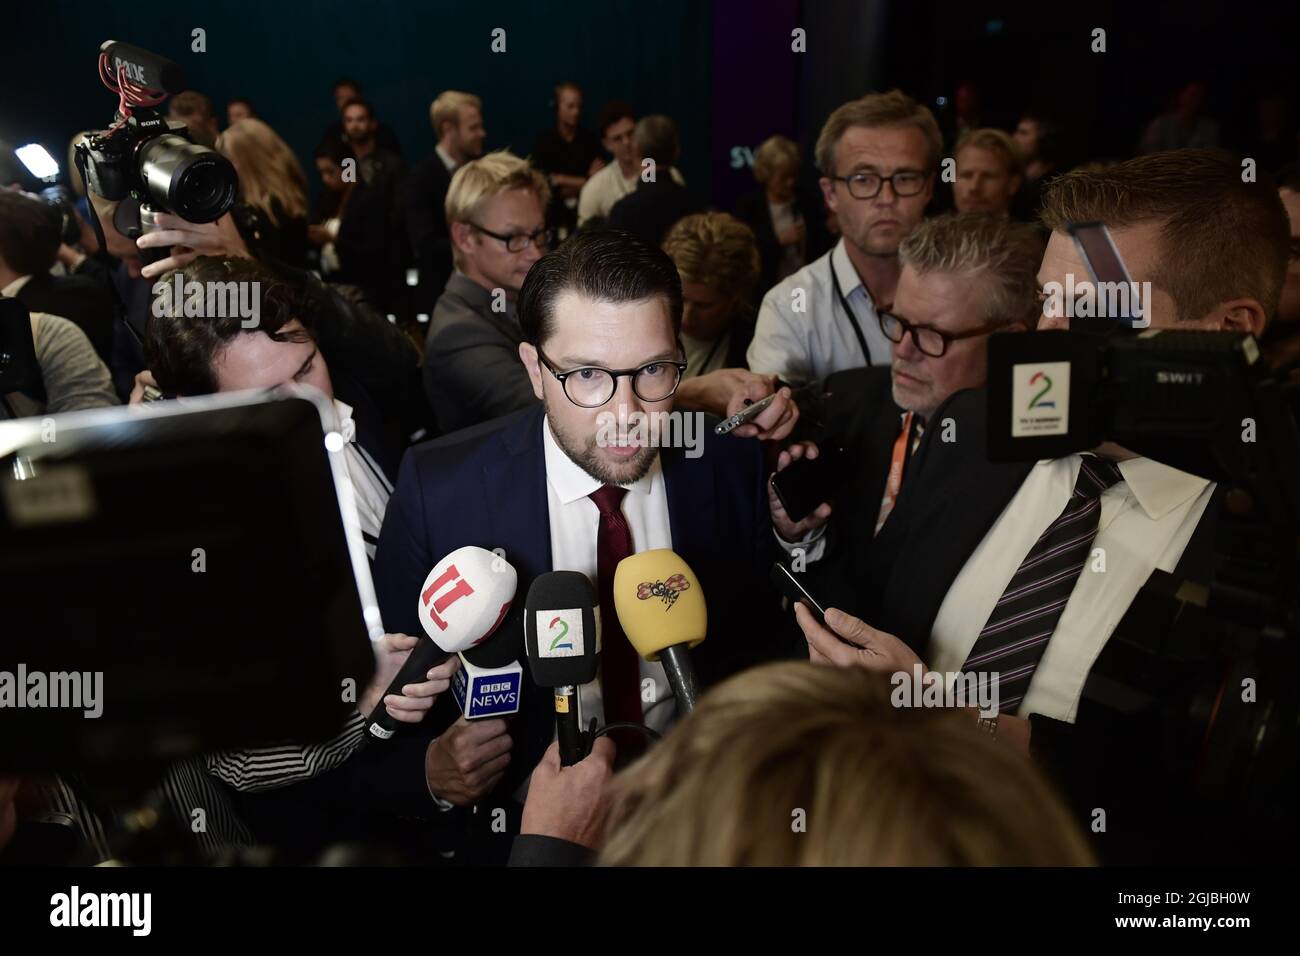 Jimmie Akesson of the Sweden Democrats after a party leader debate in SVT, Swedish national public TV broadcaster, in Stockholm September 7, 2018. Sweden's general elections will be held on Sep. 09 Photo: Stina Stjernkvist / TT / kod 11610  Stock Photo